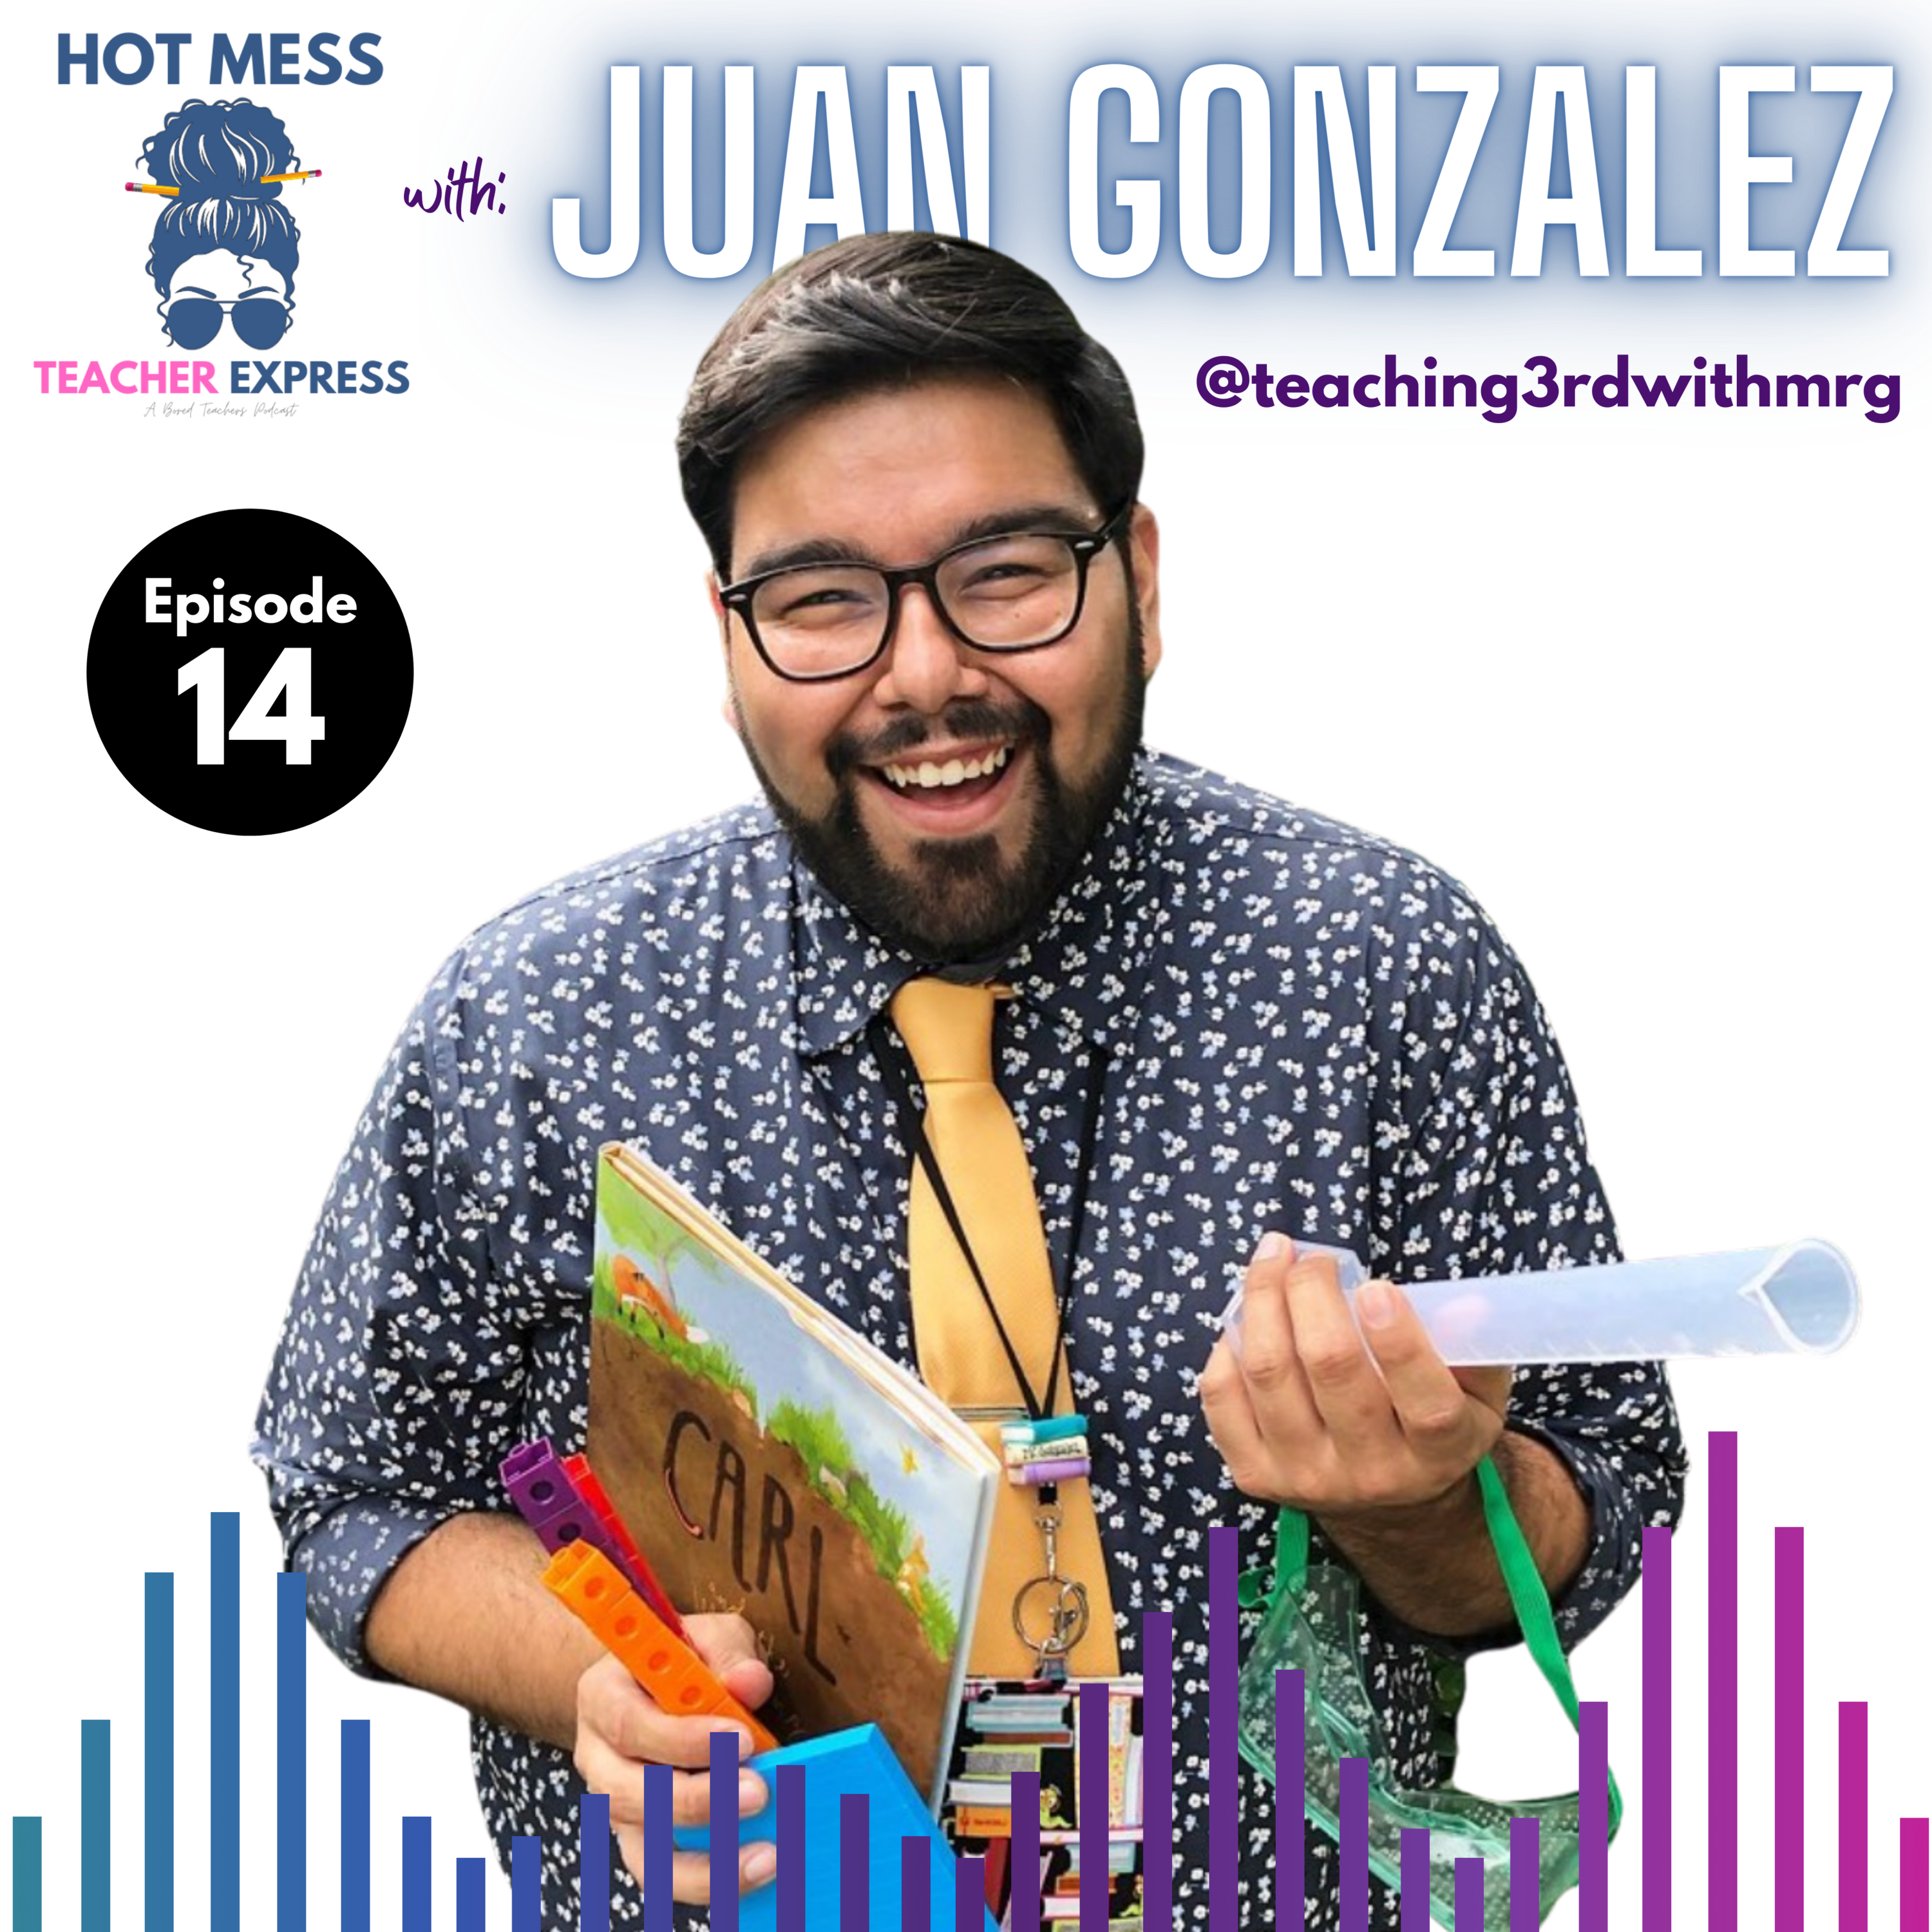 Episode #14 - Talking Books, the Power of Reading During, and the Most Difficult School Year Ever with the Amazing Juan Gonzalez